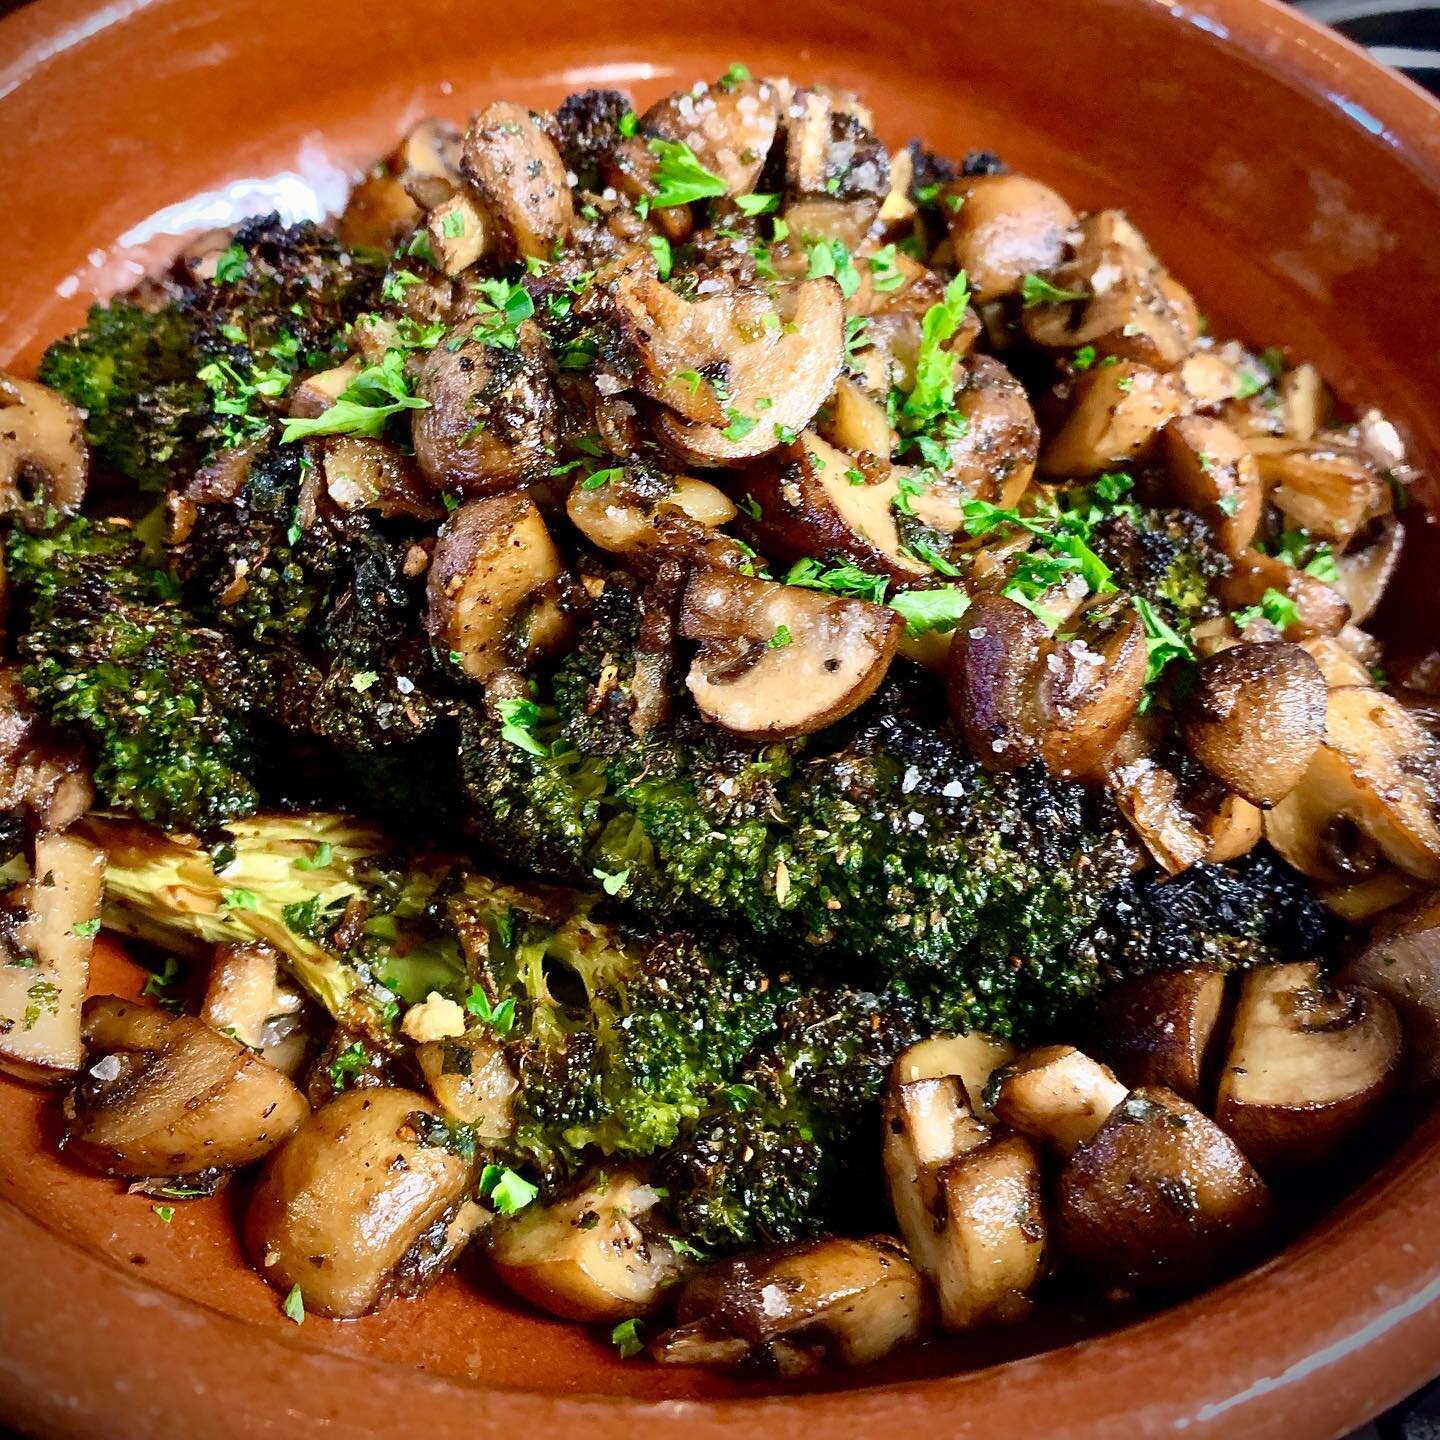 Char Broil Broccoli 🥦 smothered with Organic Brown Mushrooms + Brown Sage Butter 😋😋😋

#food #delicious #real #love #local